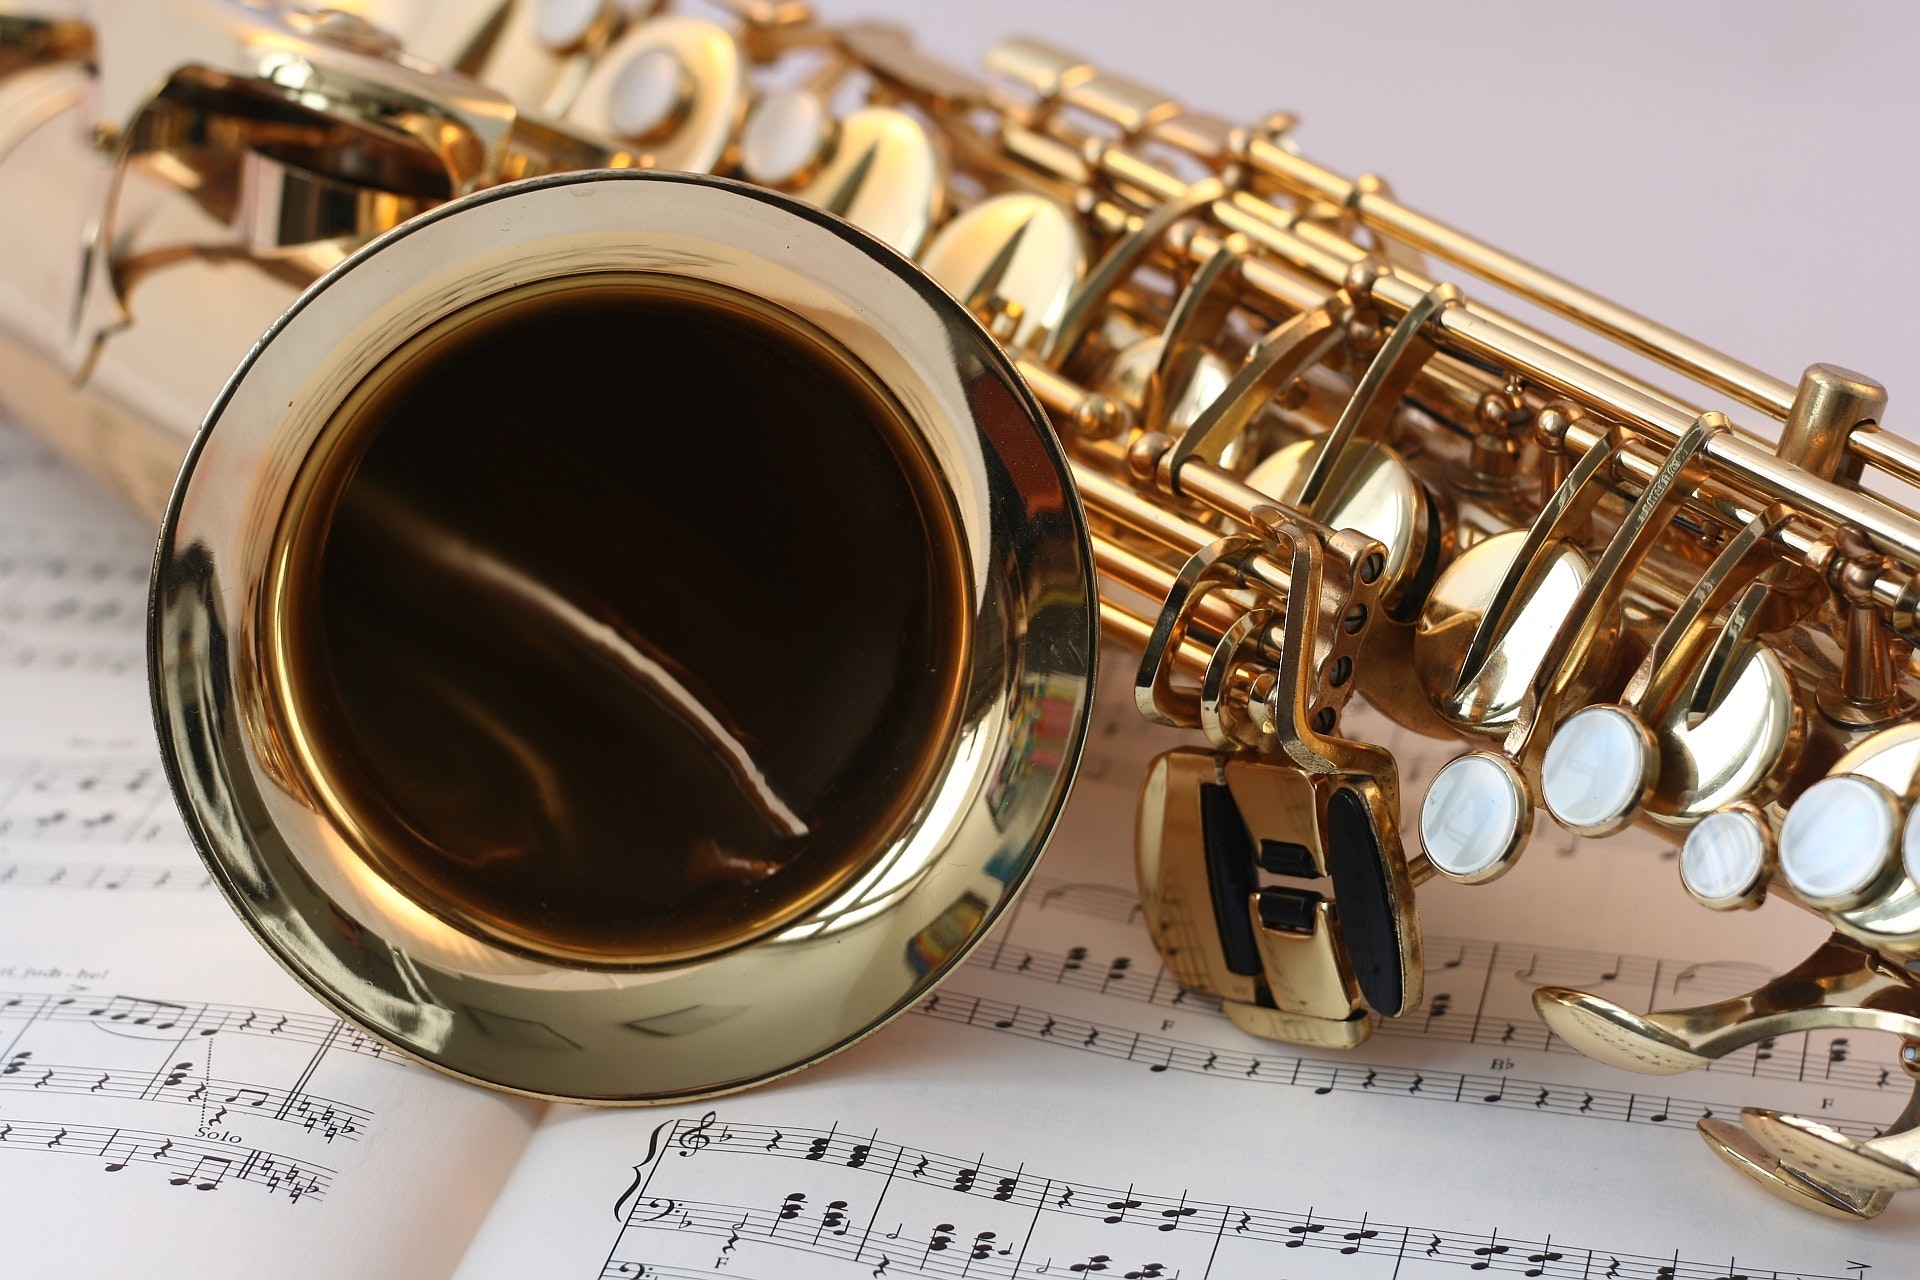 Saxophone Beginners Guide  How to Play the Saxophone: ipassio